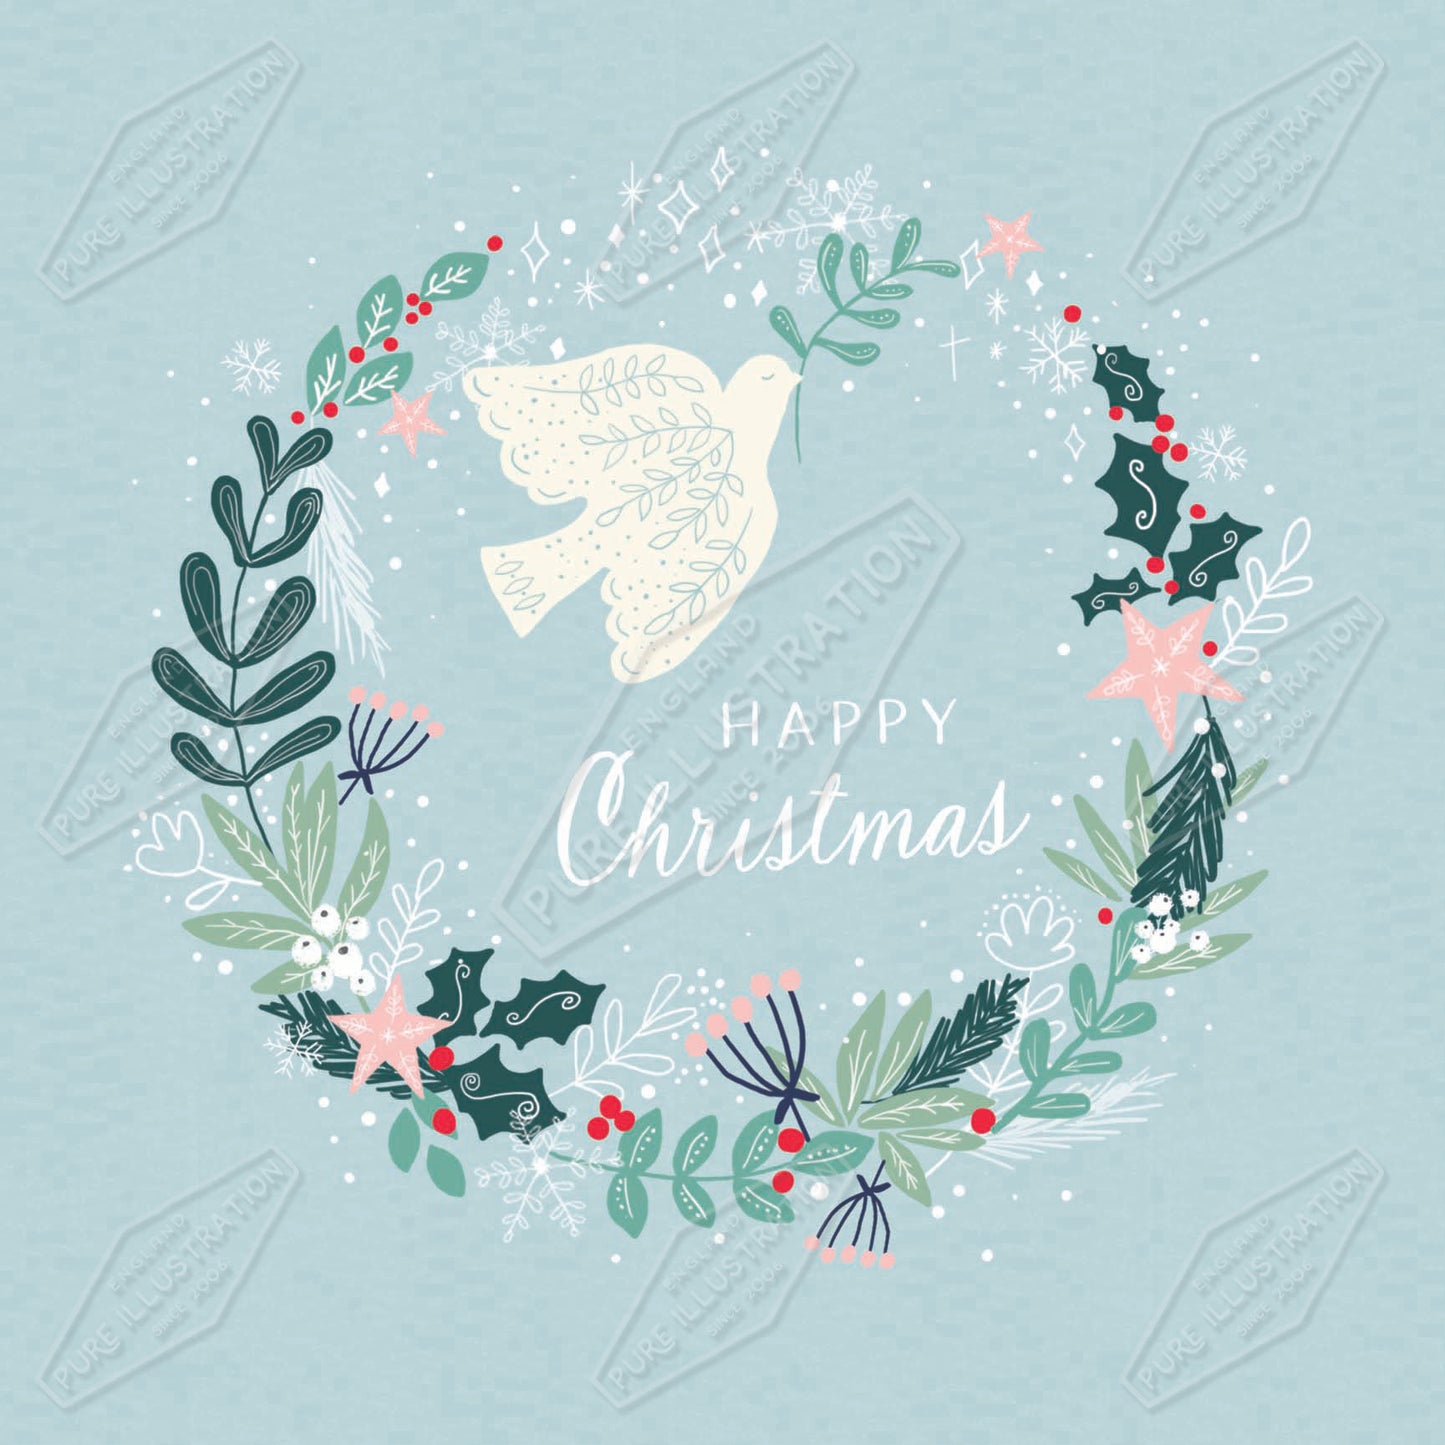 00035406SLA- Sarah Lake is represented by Pure Art Licensing Agency - Christmas Greeting Card Design